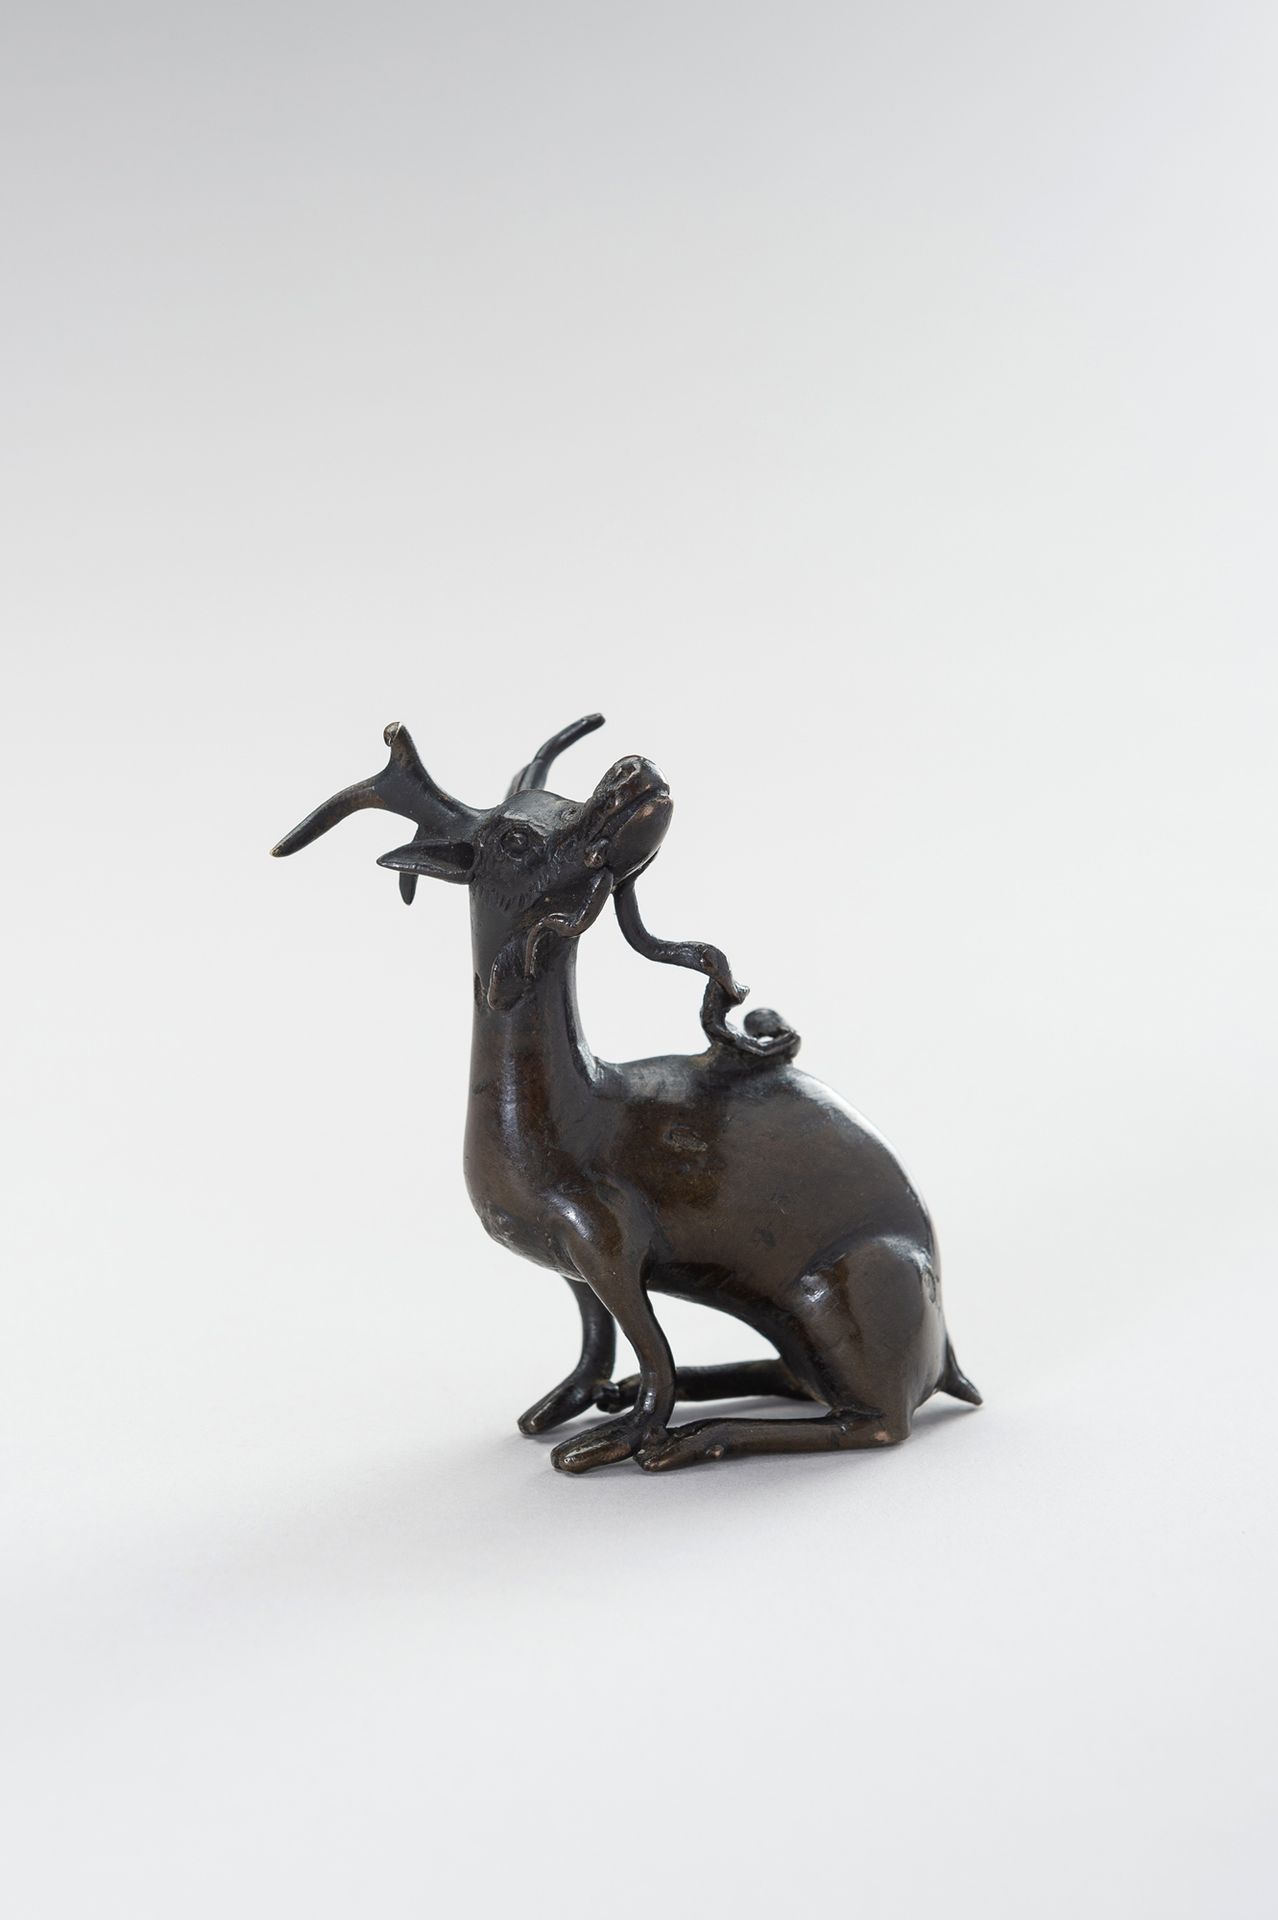 A CHINESE BRONZE WATER DROPPER IN THE SHAPE OF A STAG 中国青铜鹿形滴水壶
中国，明末（1368-1644）&hellip;